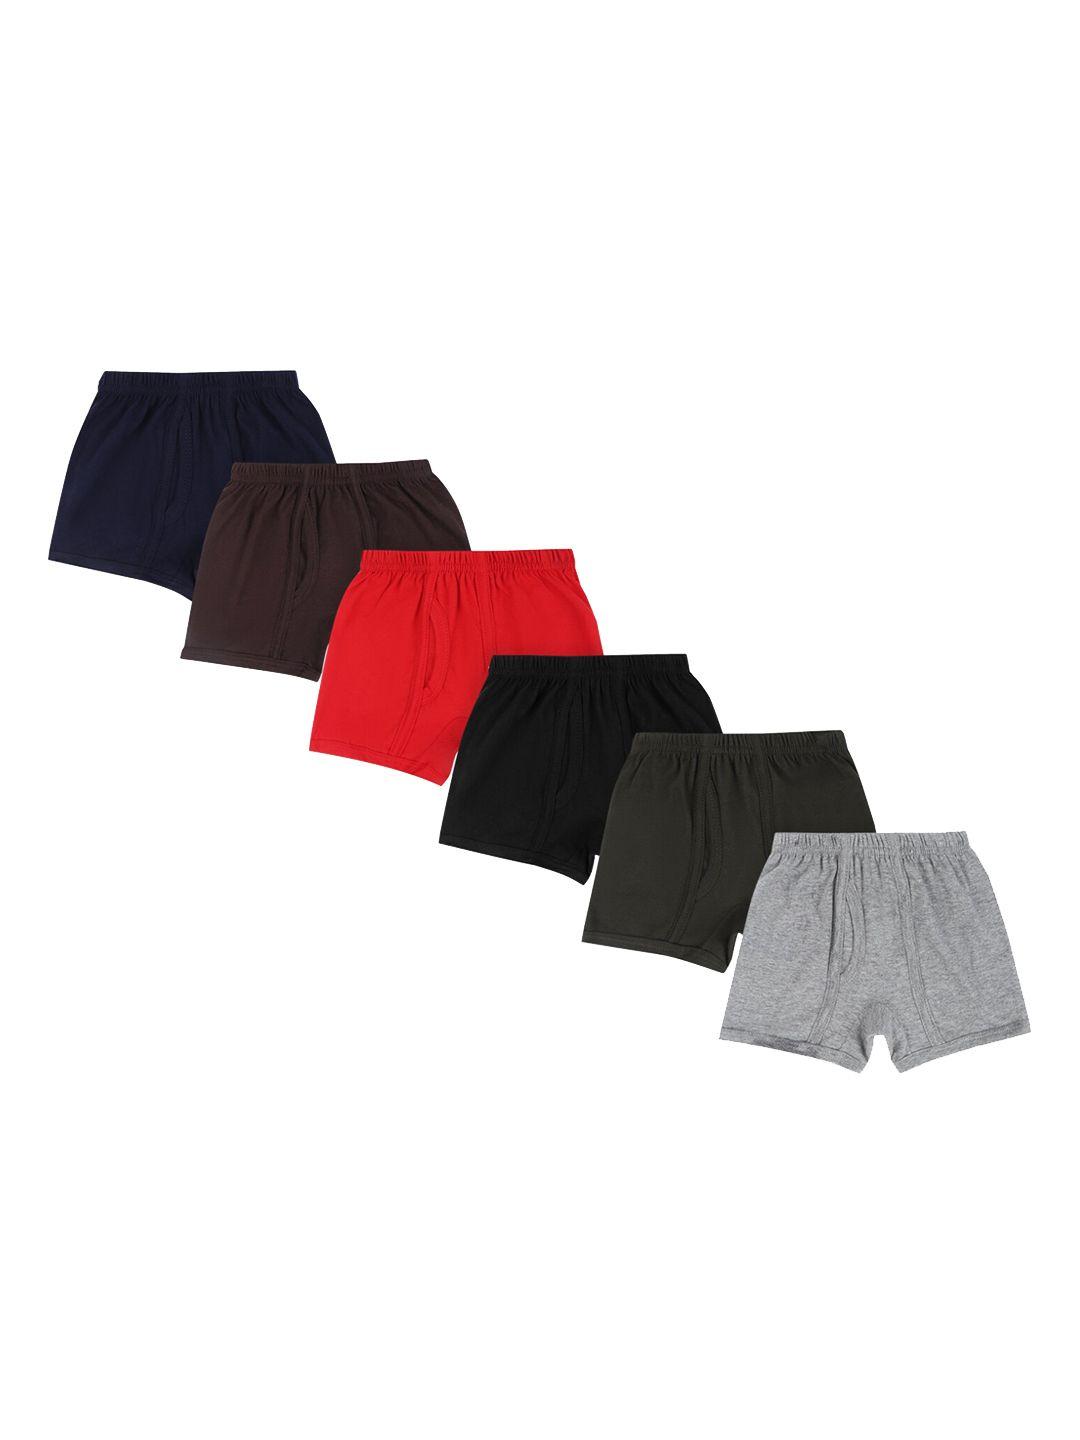 dyca boys pack of 6 assorted cotton trunk